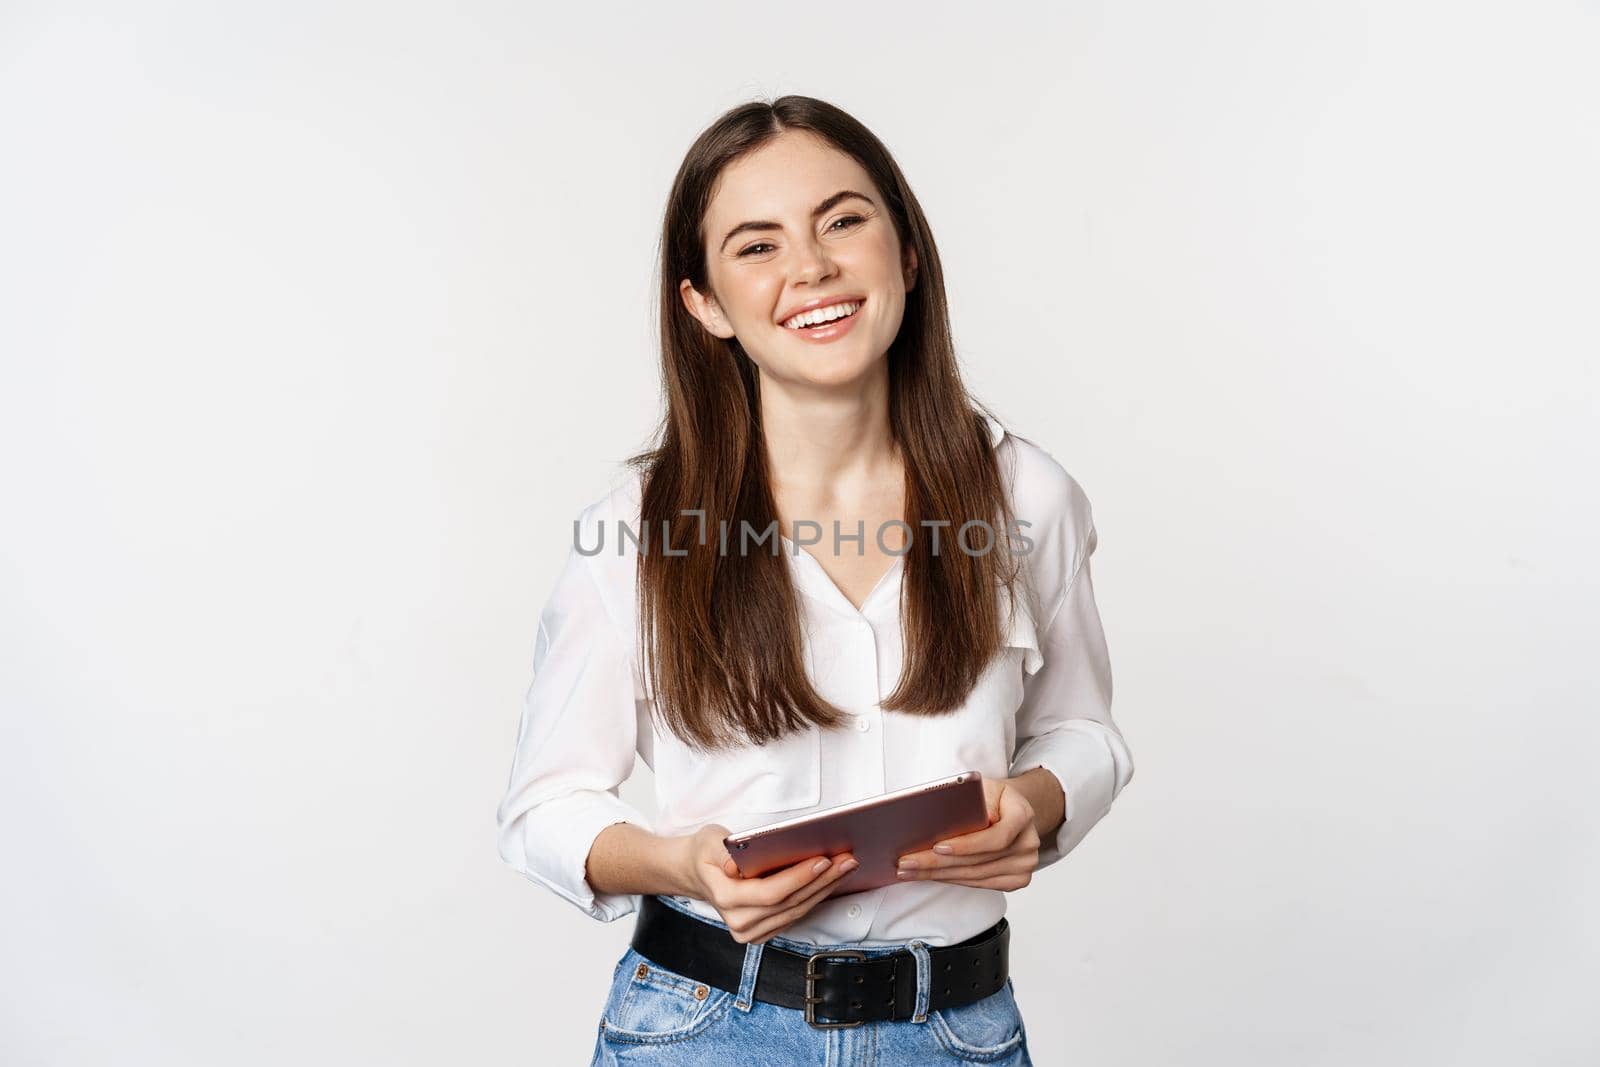 Smiling modern woman standing with digital tablet, laughing and looking happy, working, posing against white studio background.